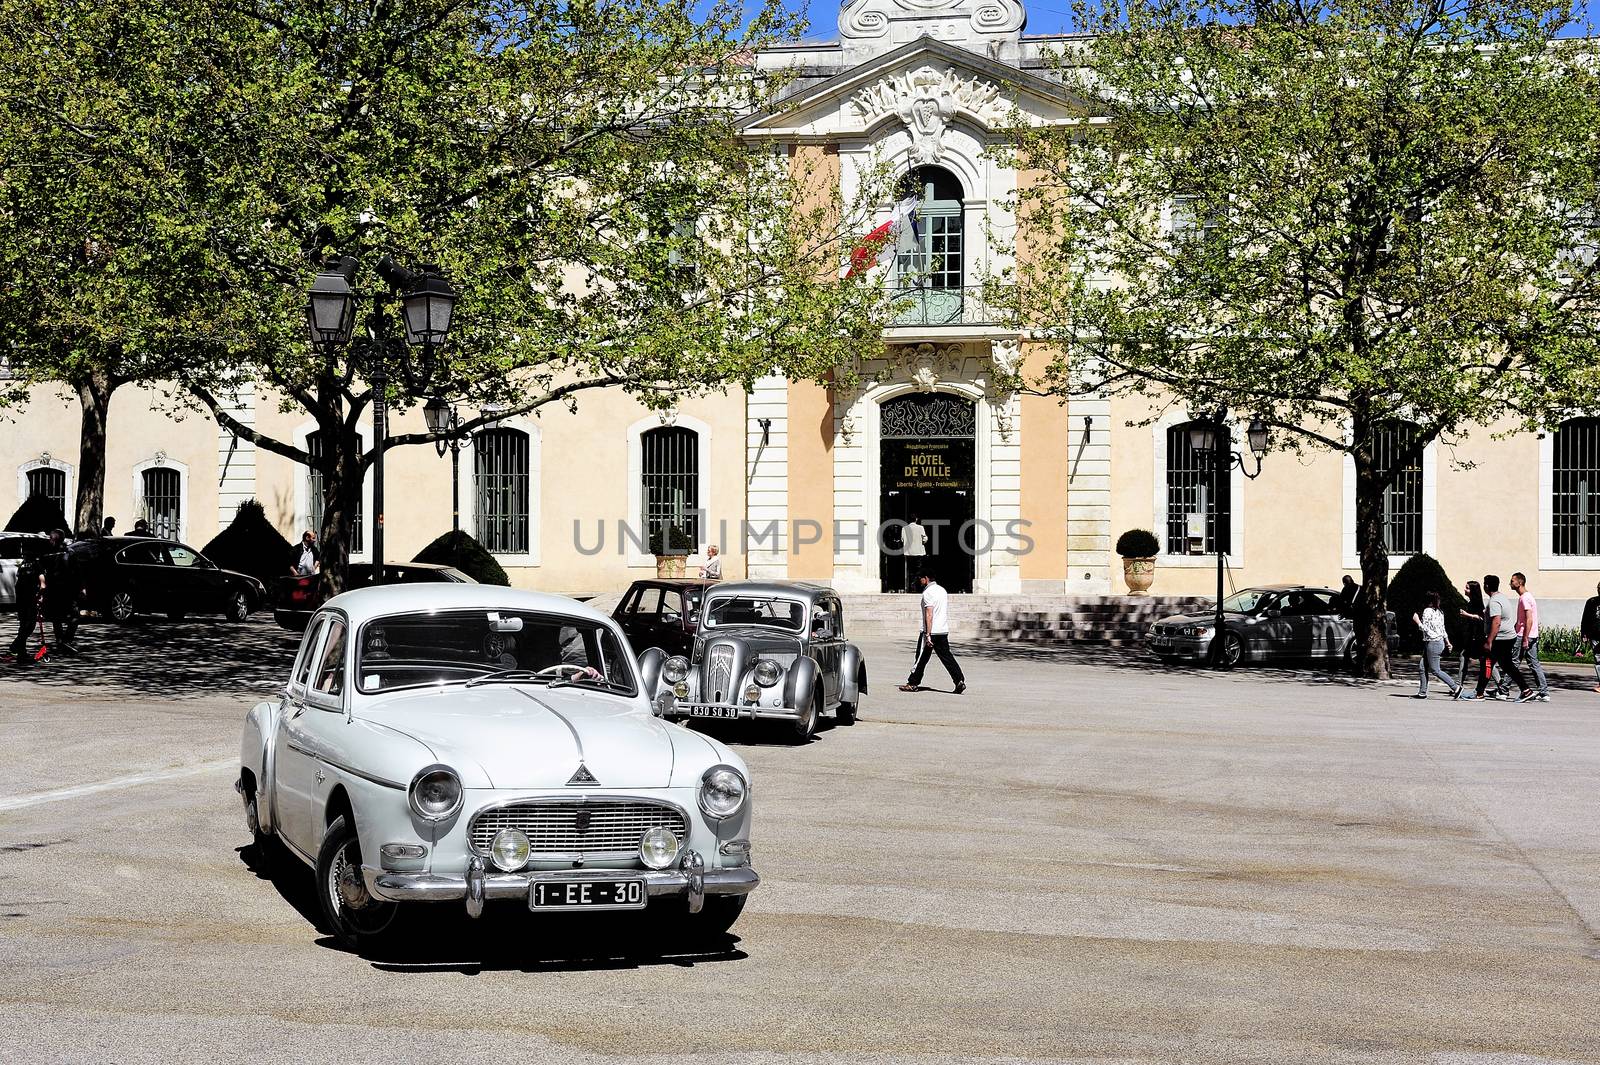 Renault frigate dating from 1956 photographed in gathering old Town Hall Square car in the town of Ales, in the Gard department